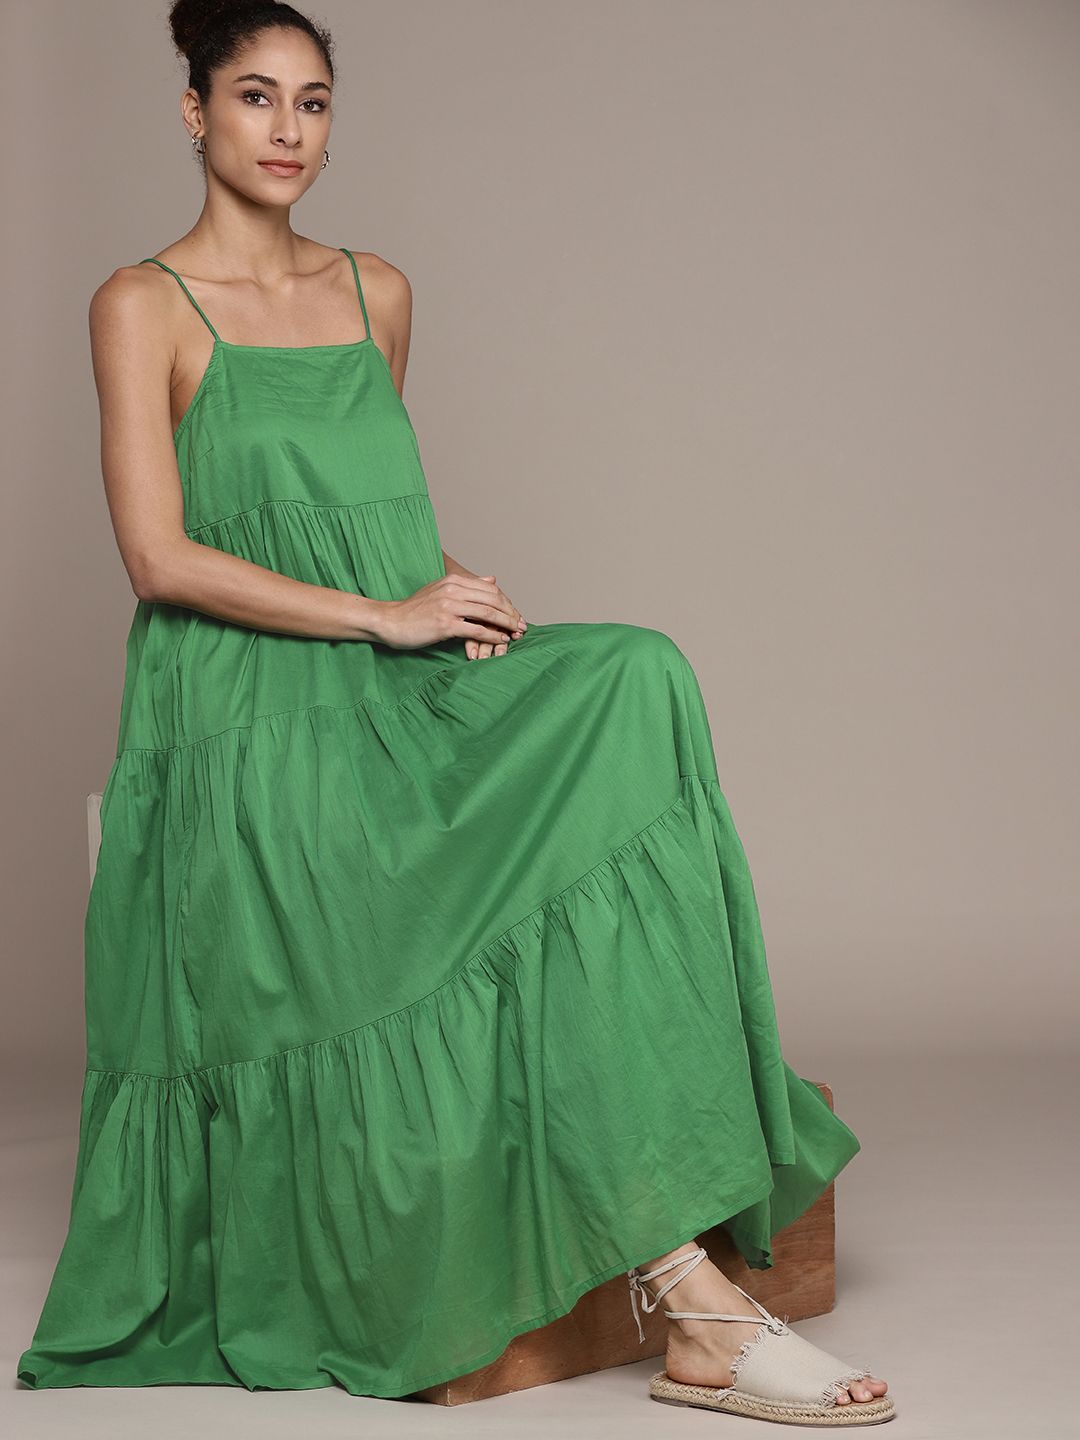 MANGO Green Solid Cotton Tiered Maxi Dress Price in India